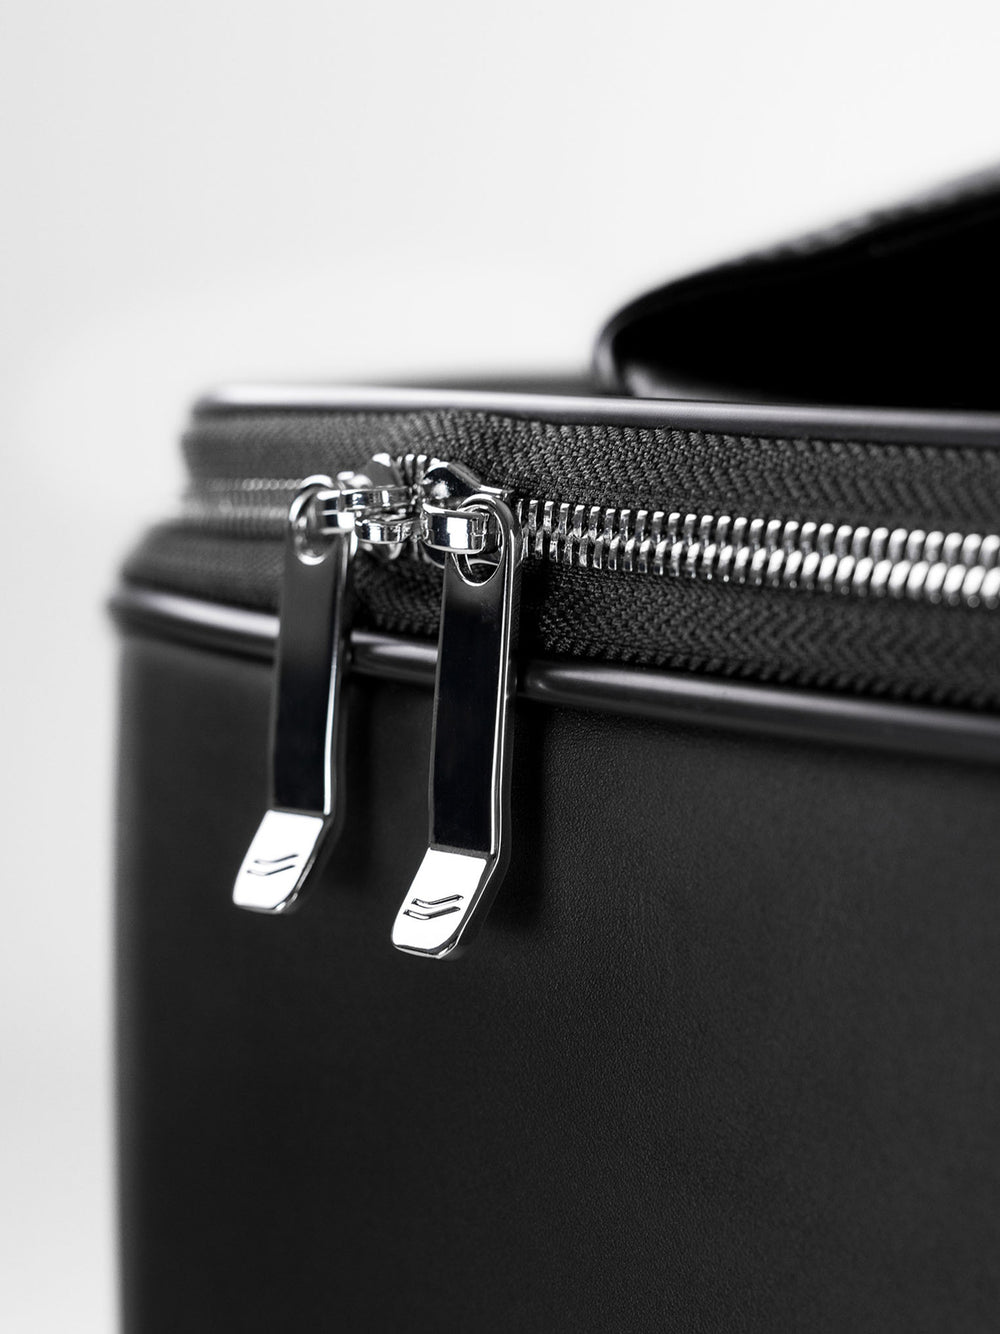 f38 carry on luggage ykk zippers in black leather schwarzes leder